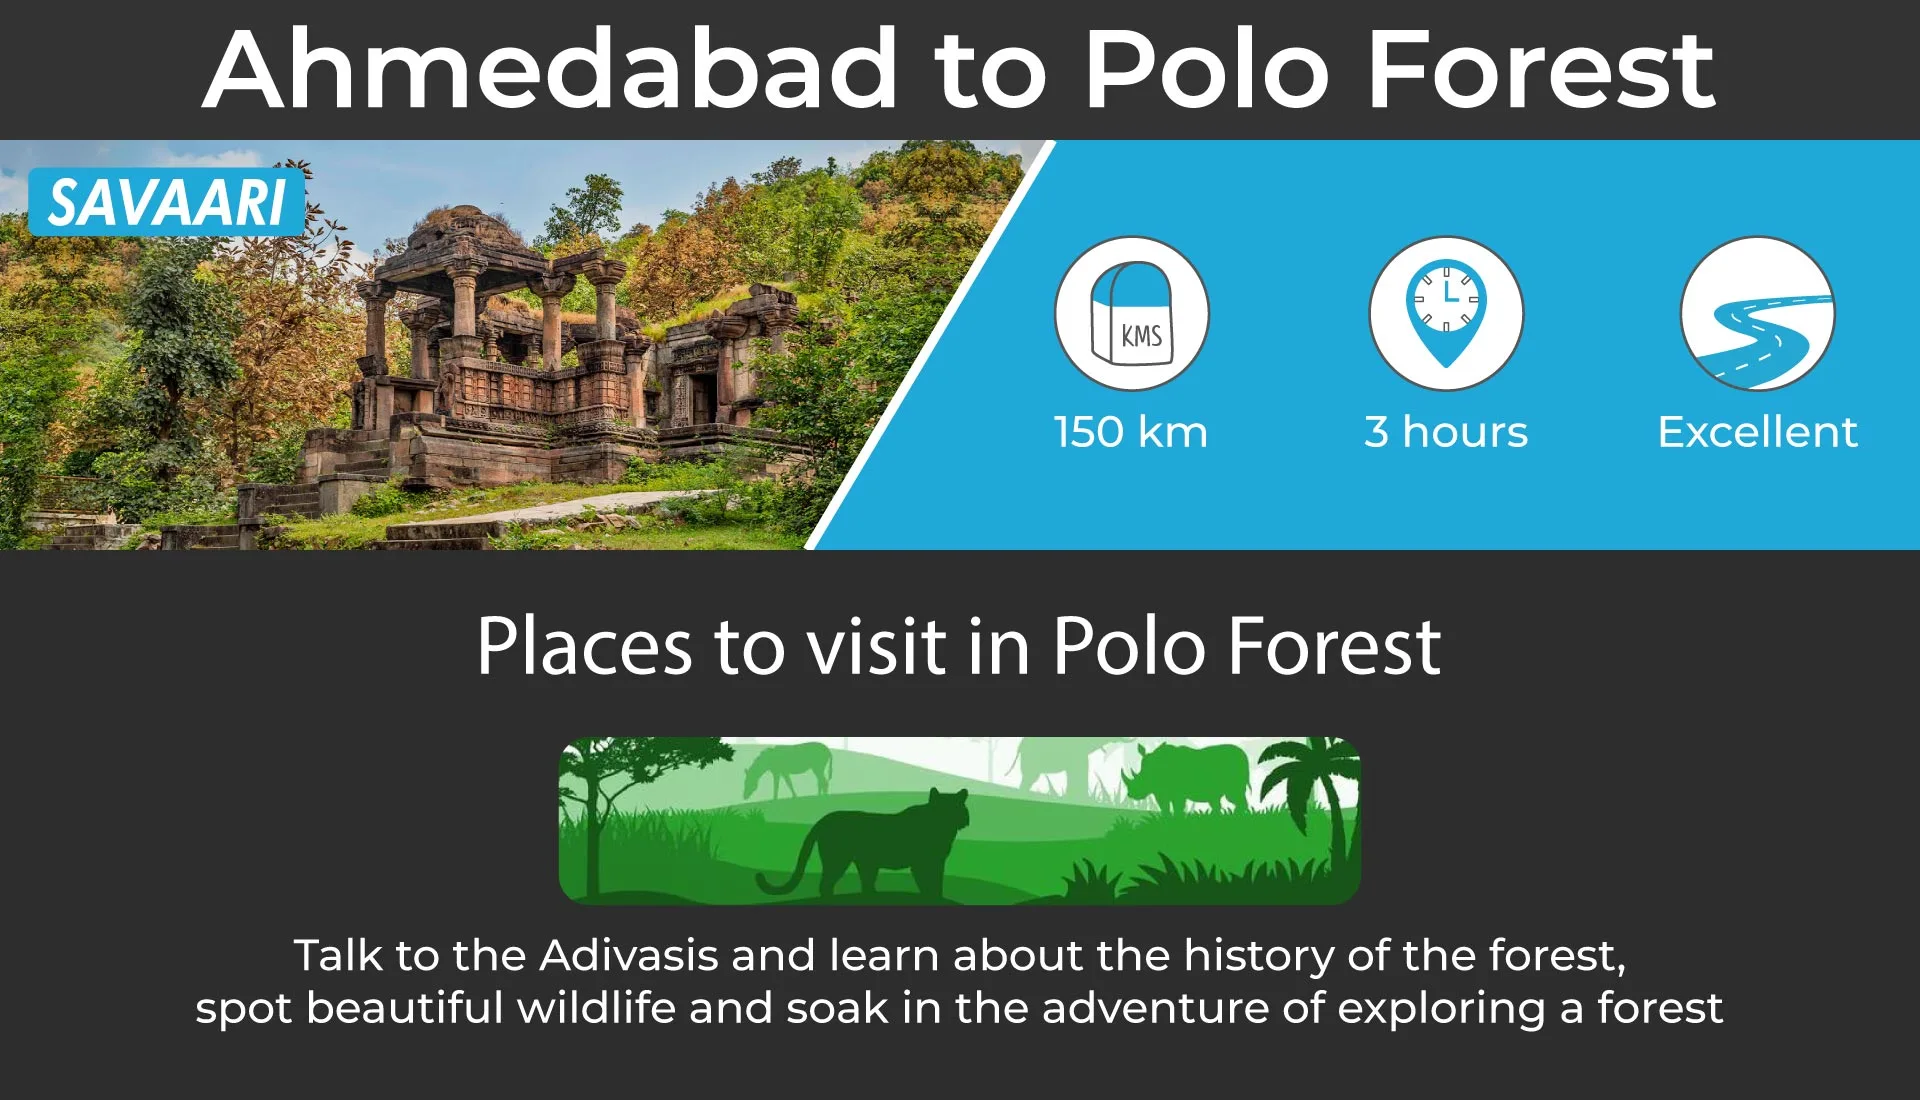 day trip to polo forest from Ahmedabad